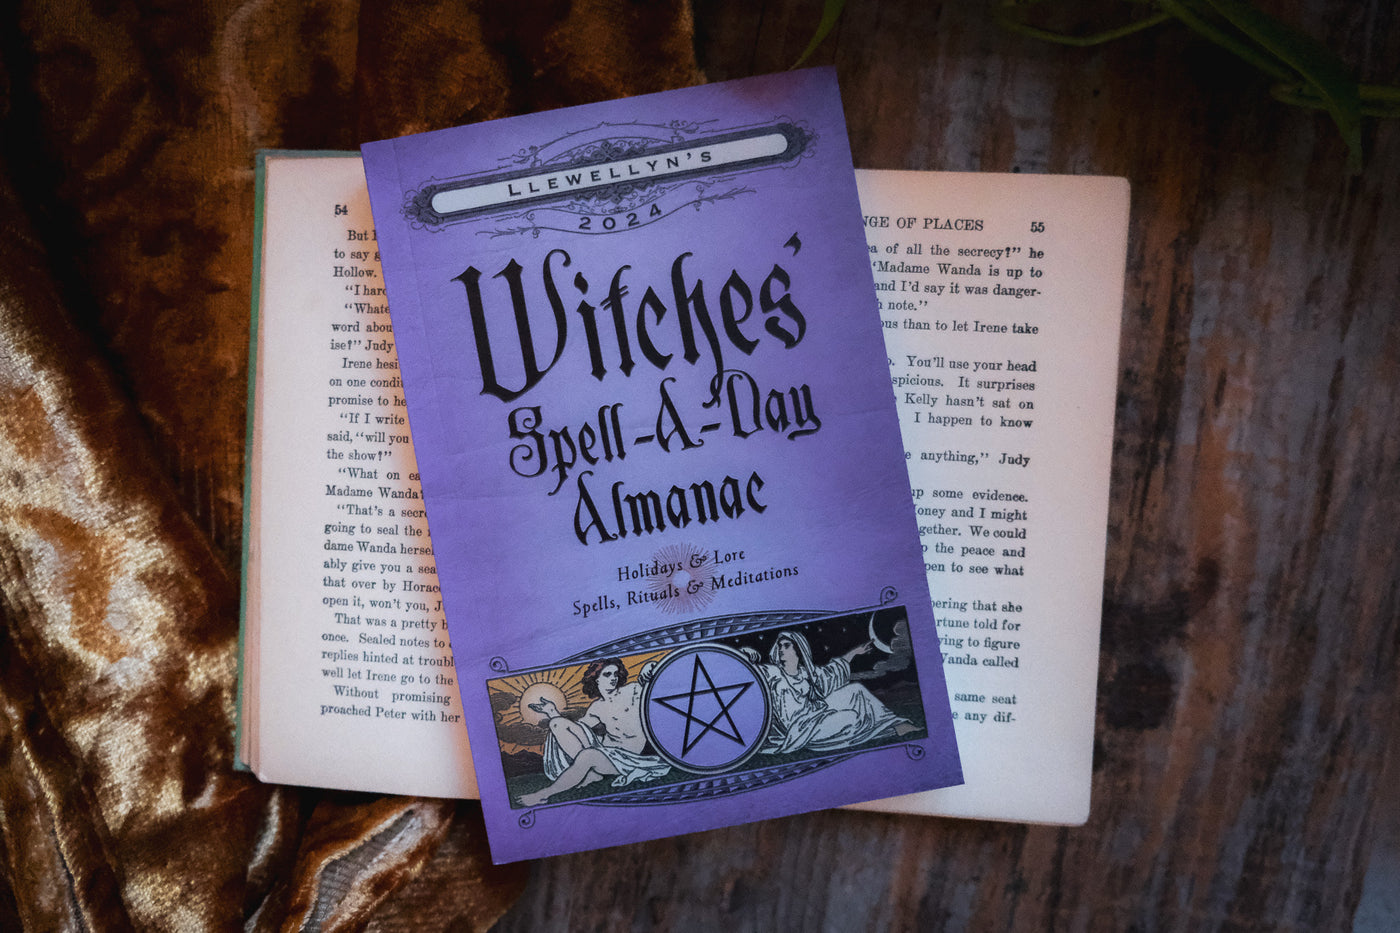 Llewellyn's Witches Spell a Day Almanac 2024